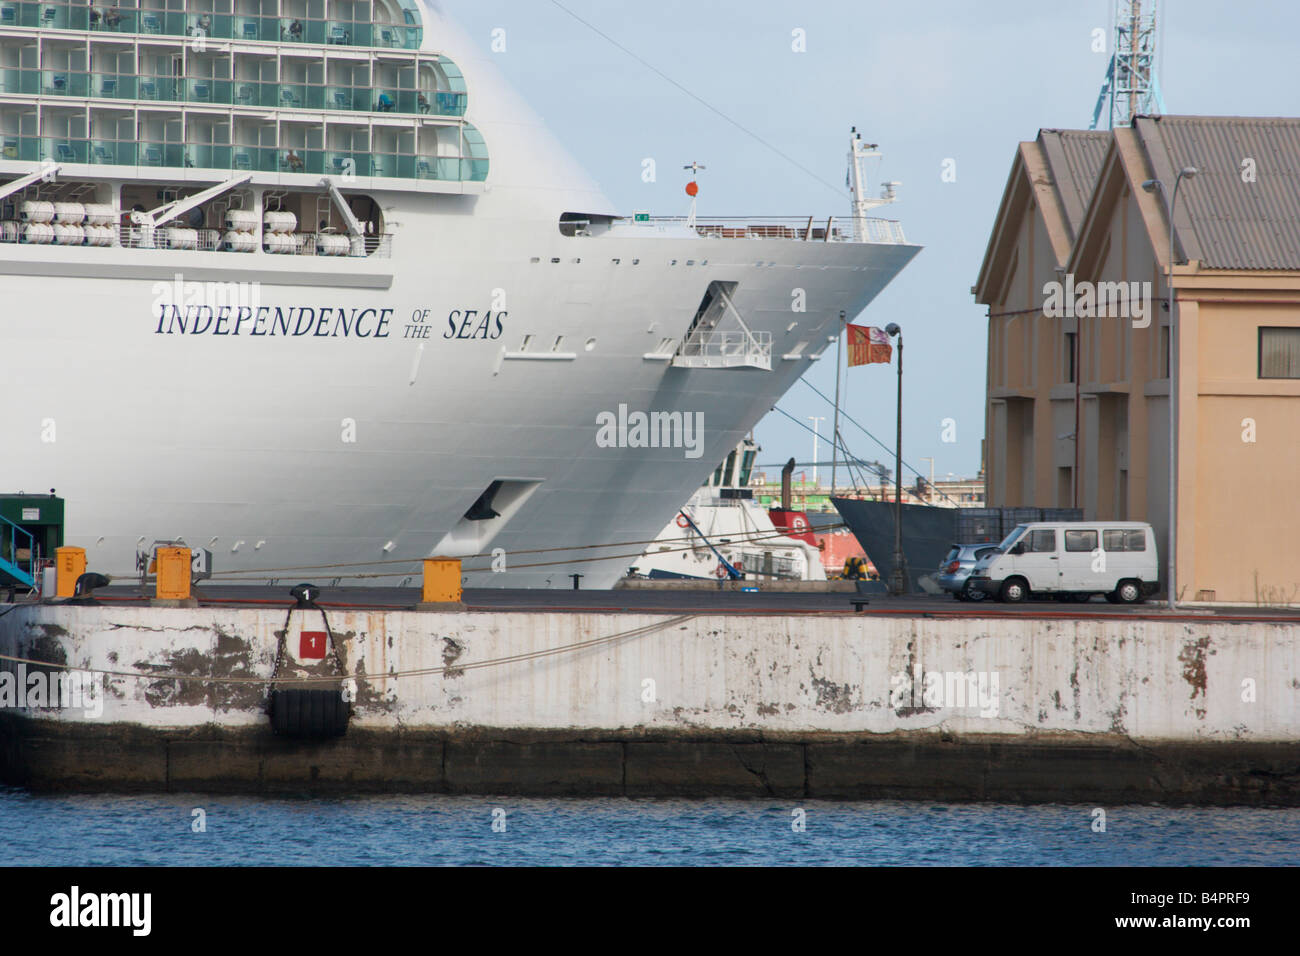 The world's largest cruise ship, Independence of the Seas, visiting Las Palmas on Gran Canaria. Stock Photo